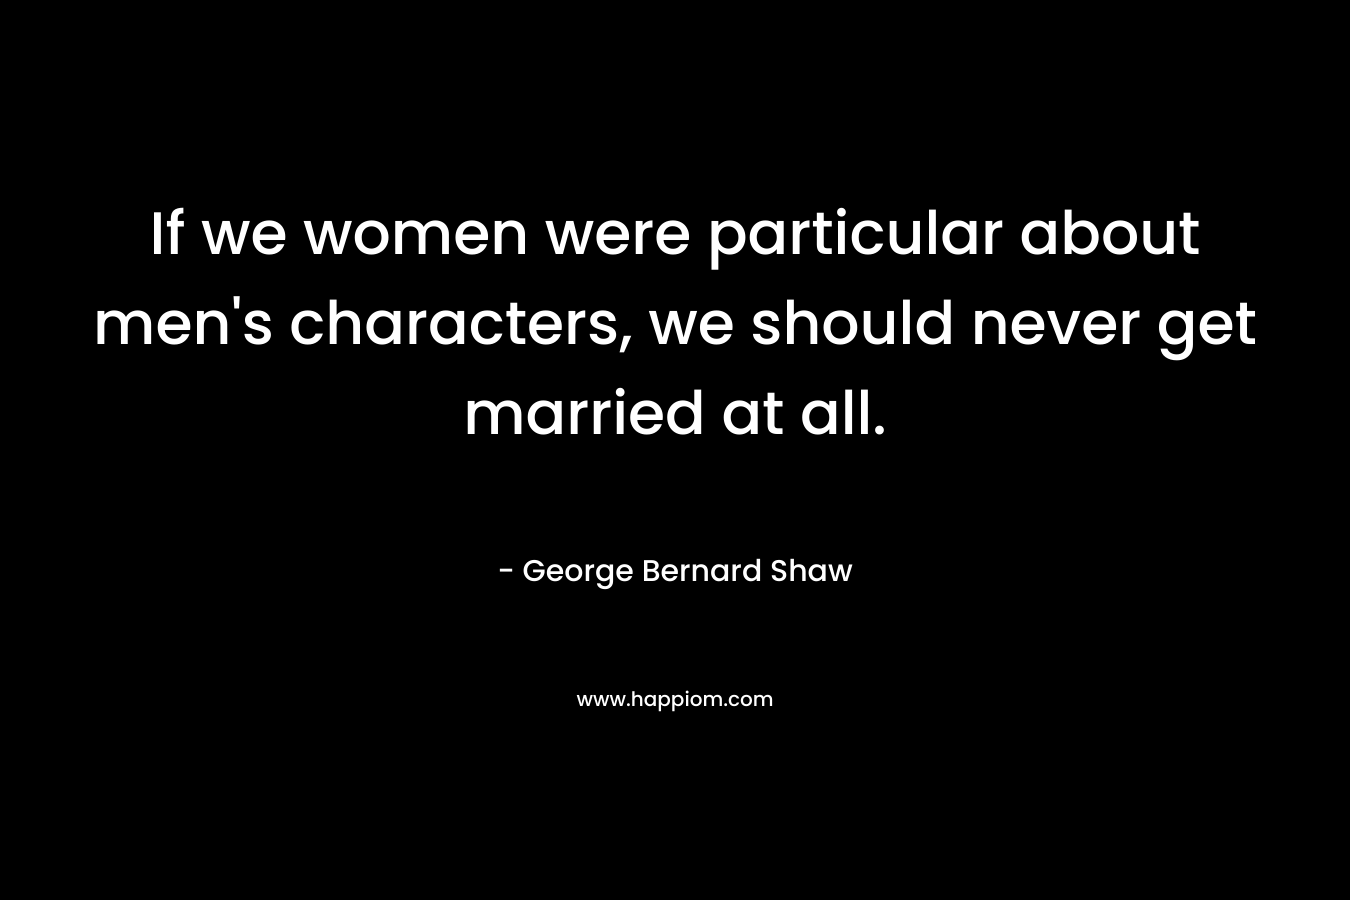 If we women were particular about men's characters, we should never get married at all.